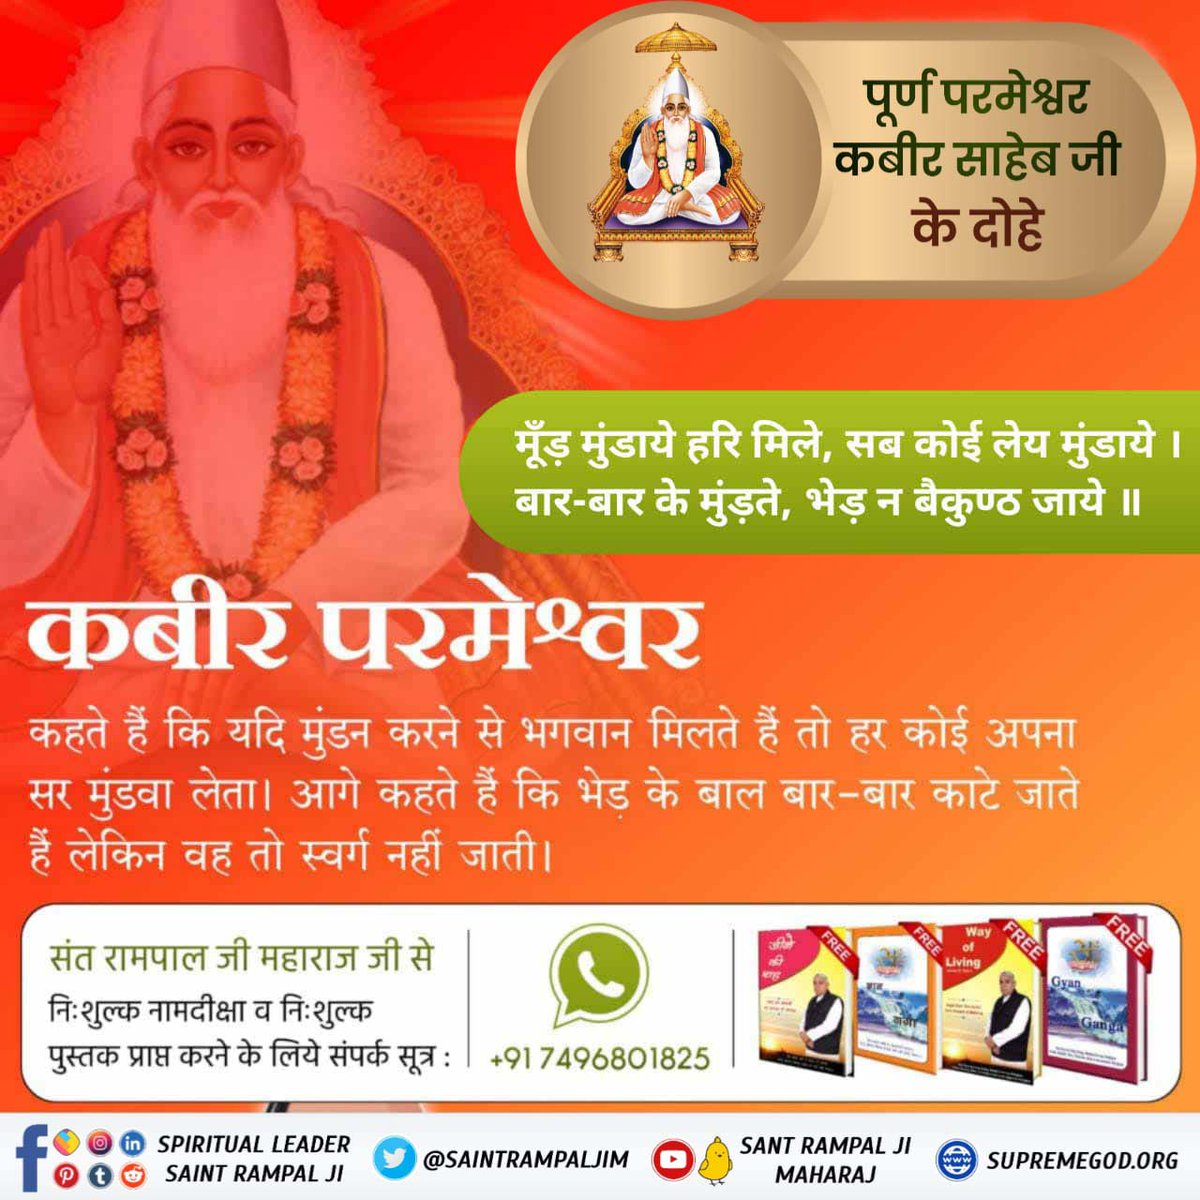 #परमात्माकबीरकी_वाणी_एकमंत्र के समान है Kabir Ji explained in order to teach Hindus that the Real Pandit is someone else. There are many who spent their lives learning books but none became wise. Only by learning a few letters of spiritual love can ensure Salvation.